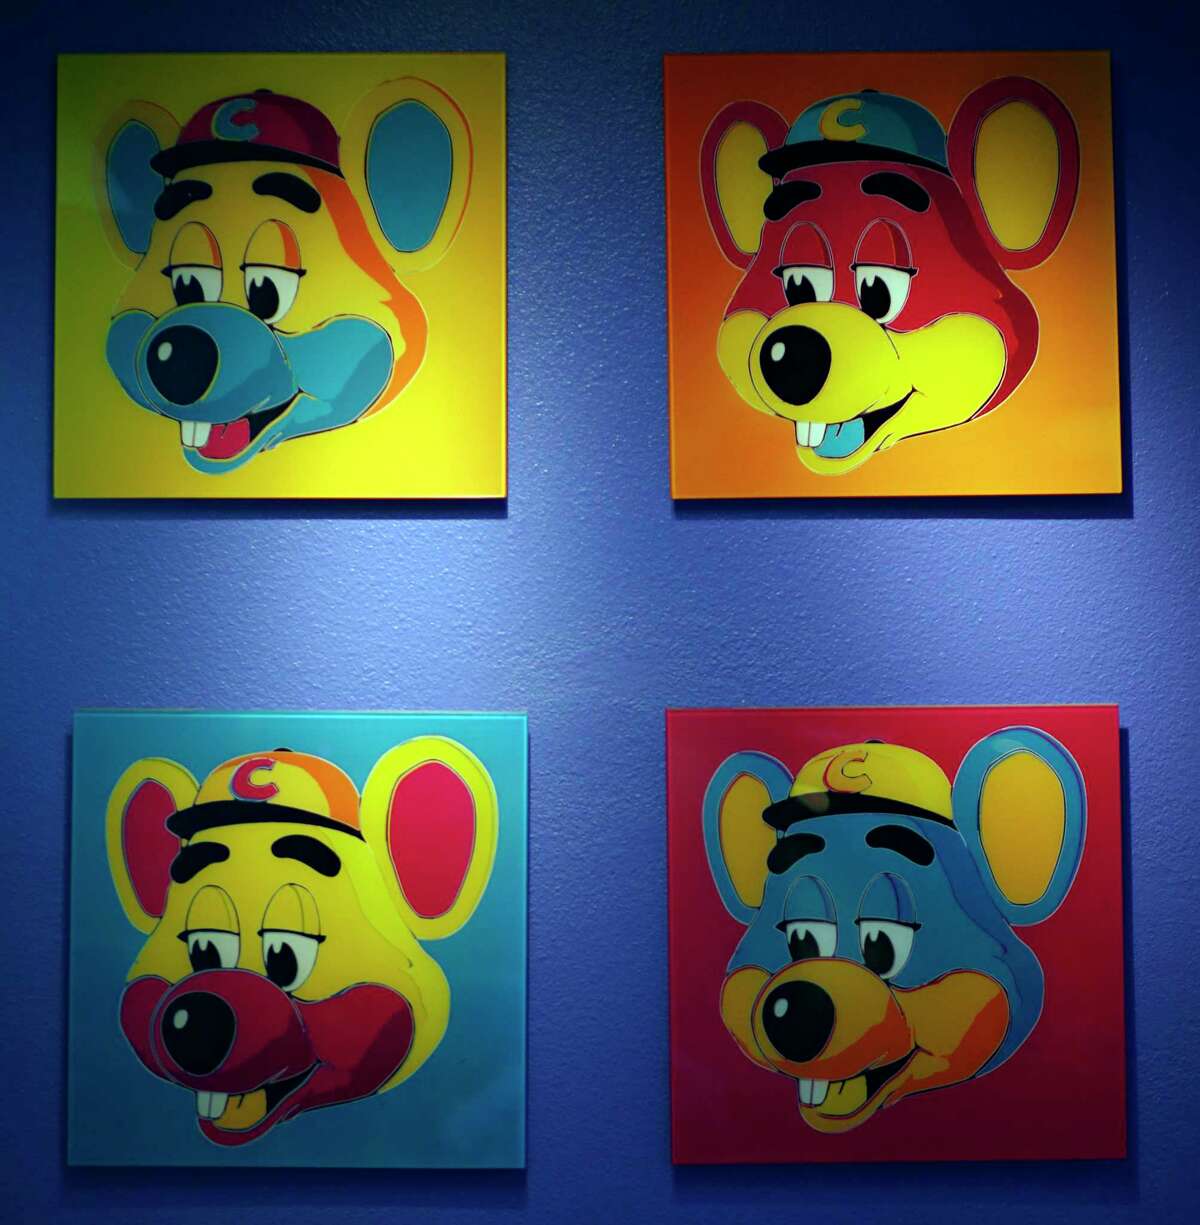 FILE - This Jan. 16, 2014 file photo shows paintings hanging on a wall at Chuck E. Cheese's in Dallas. Chuck E. Cheese pizzeria, that Mecca of fun for children but the bane of many parents, is filing for bankruptcy protection. CEC Entertainment Inc. said Thursday, Jan. 25, 2020, it was filing for voluntary protection under Chapter 11 ain order to overcome the financial strain resulting from prolonged, COVID-19 related venue closures.a (G.J. McCarthy/The Dallas Morning News via AP)